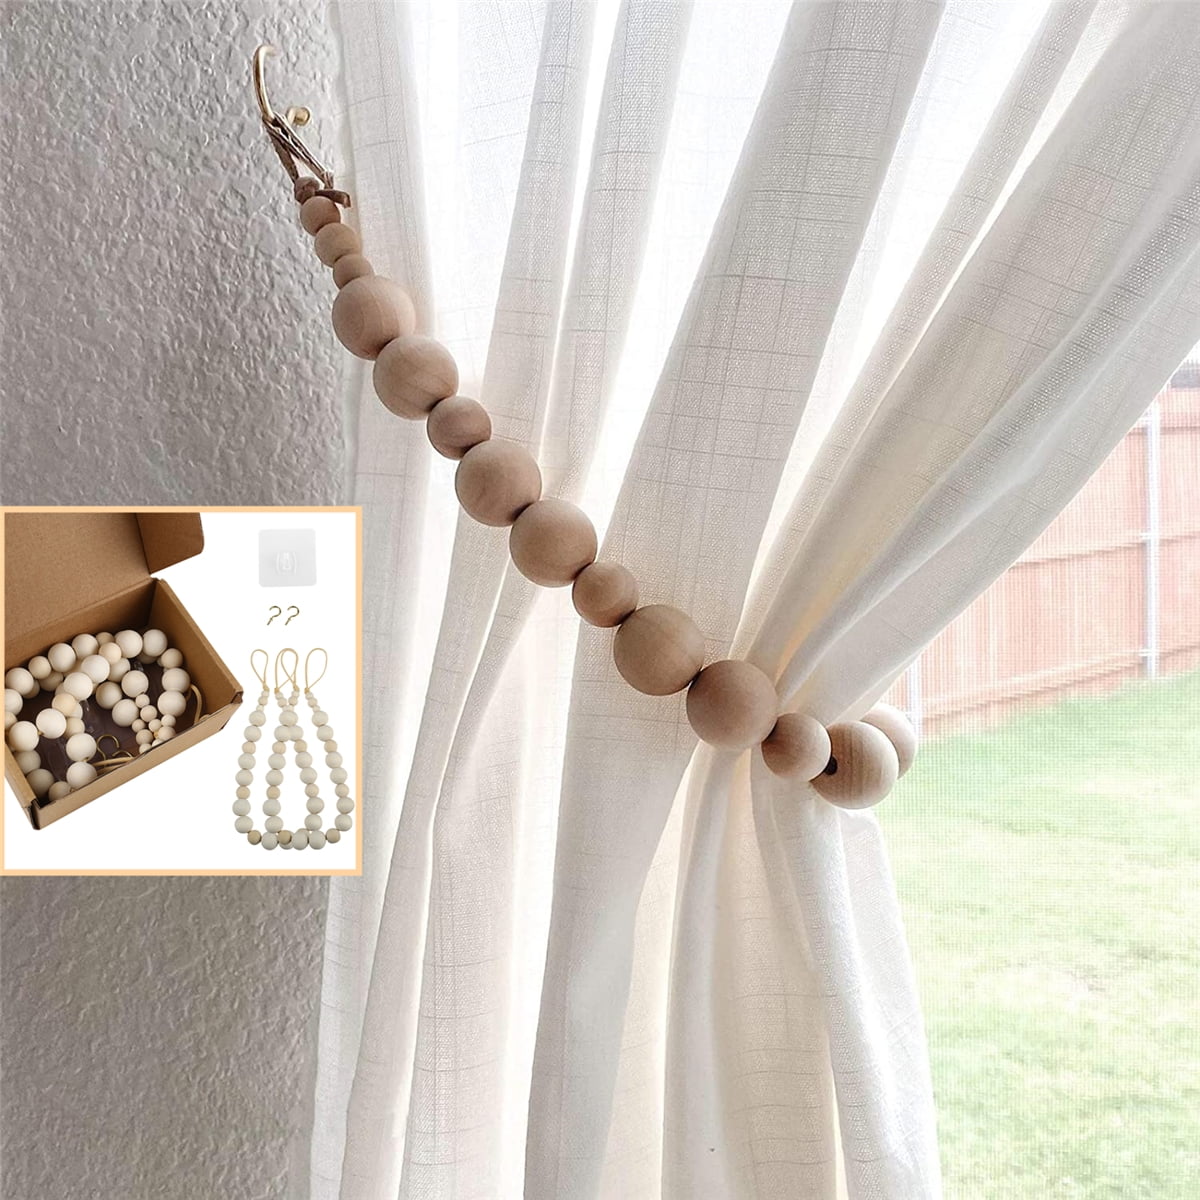 Details about   2X4x Curtain Tie Backs Magnetic Ball Buckle Holder Tieback Clips Home Window Pin 